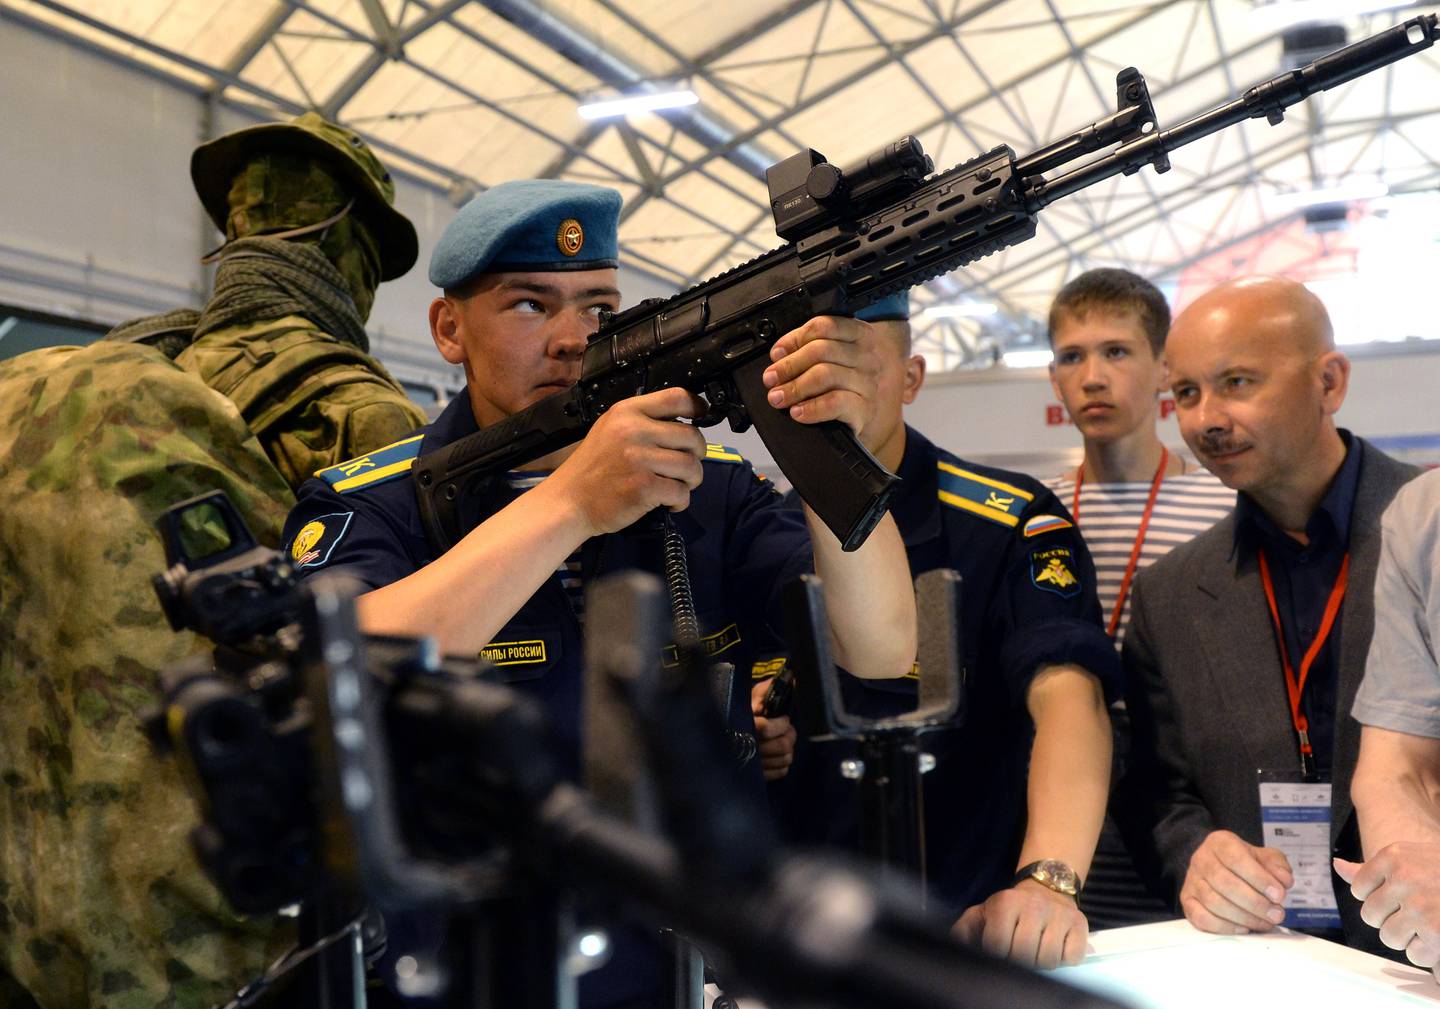 Young cadet holds an AK-12 aloft, examining it's sights at a military exhibition.